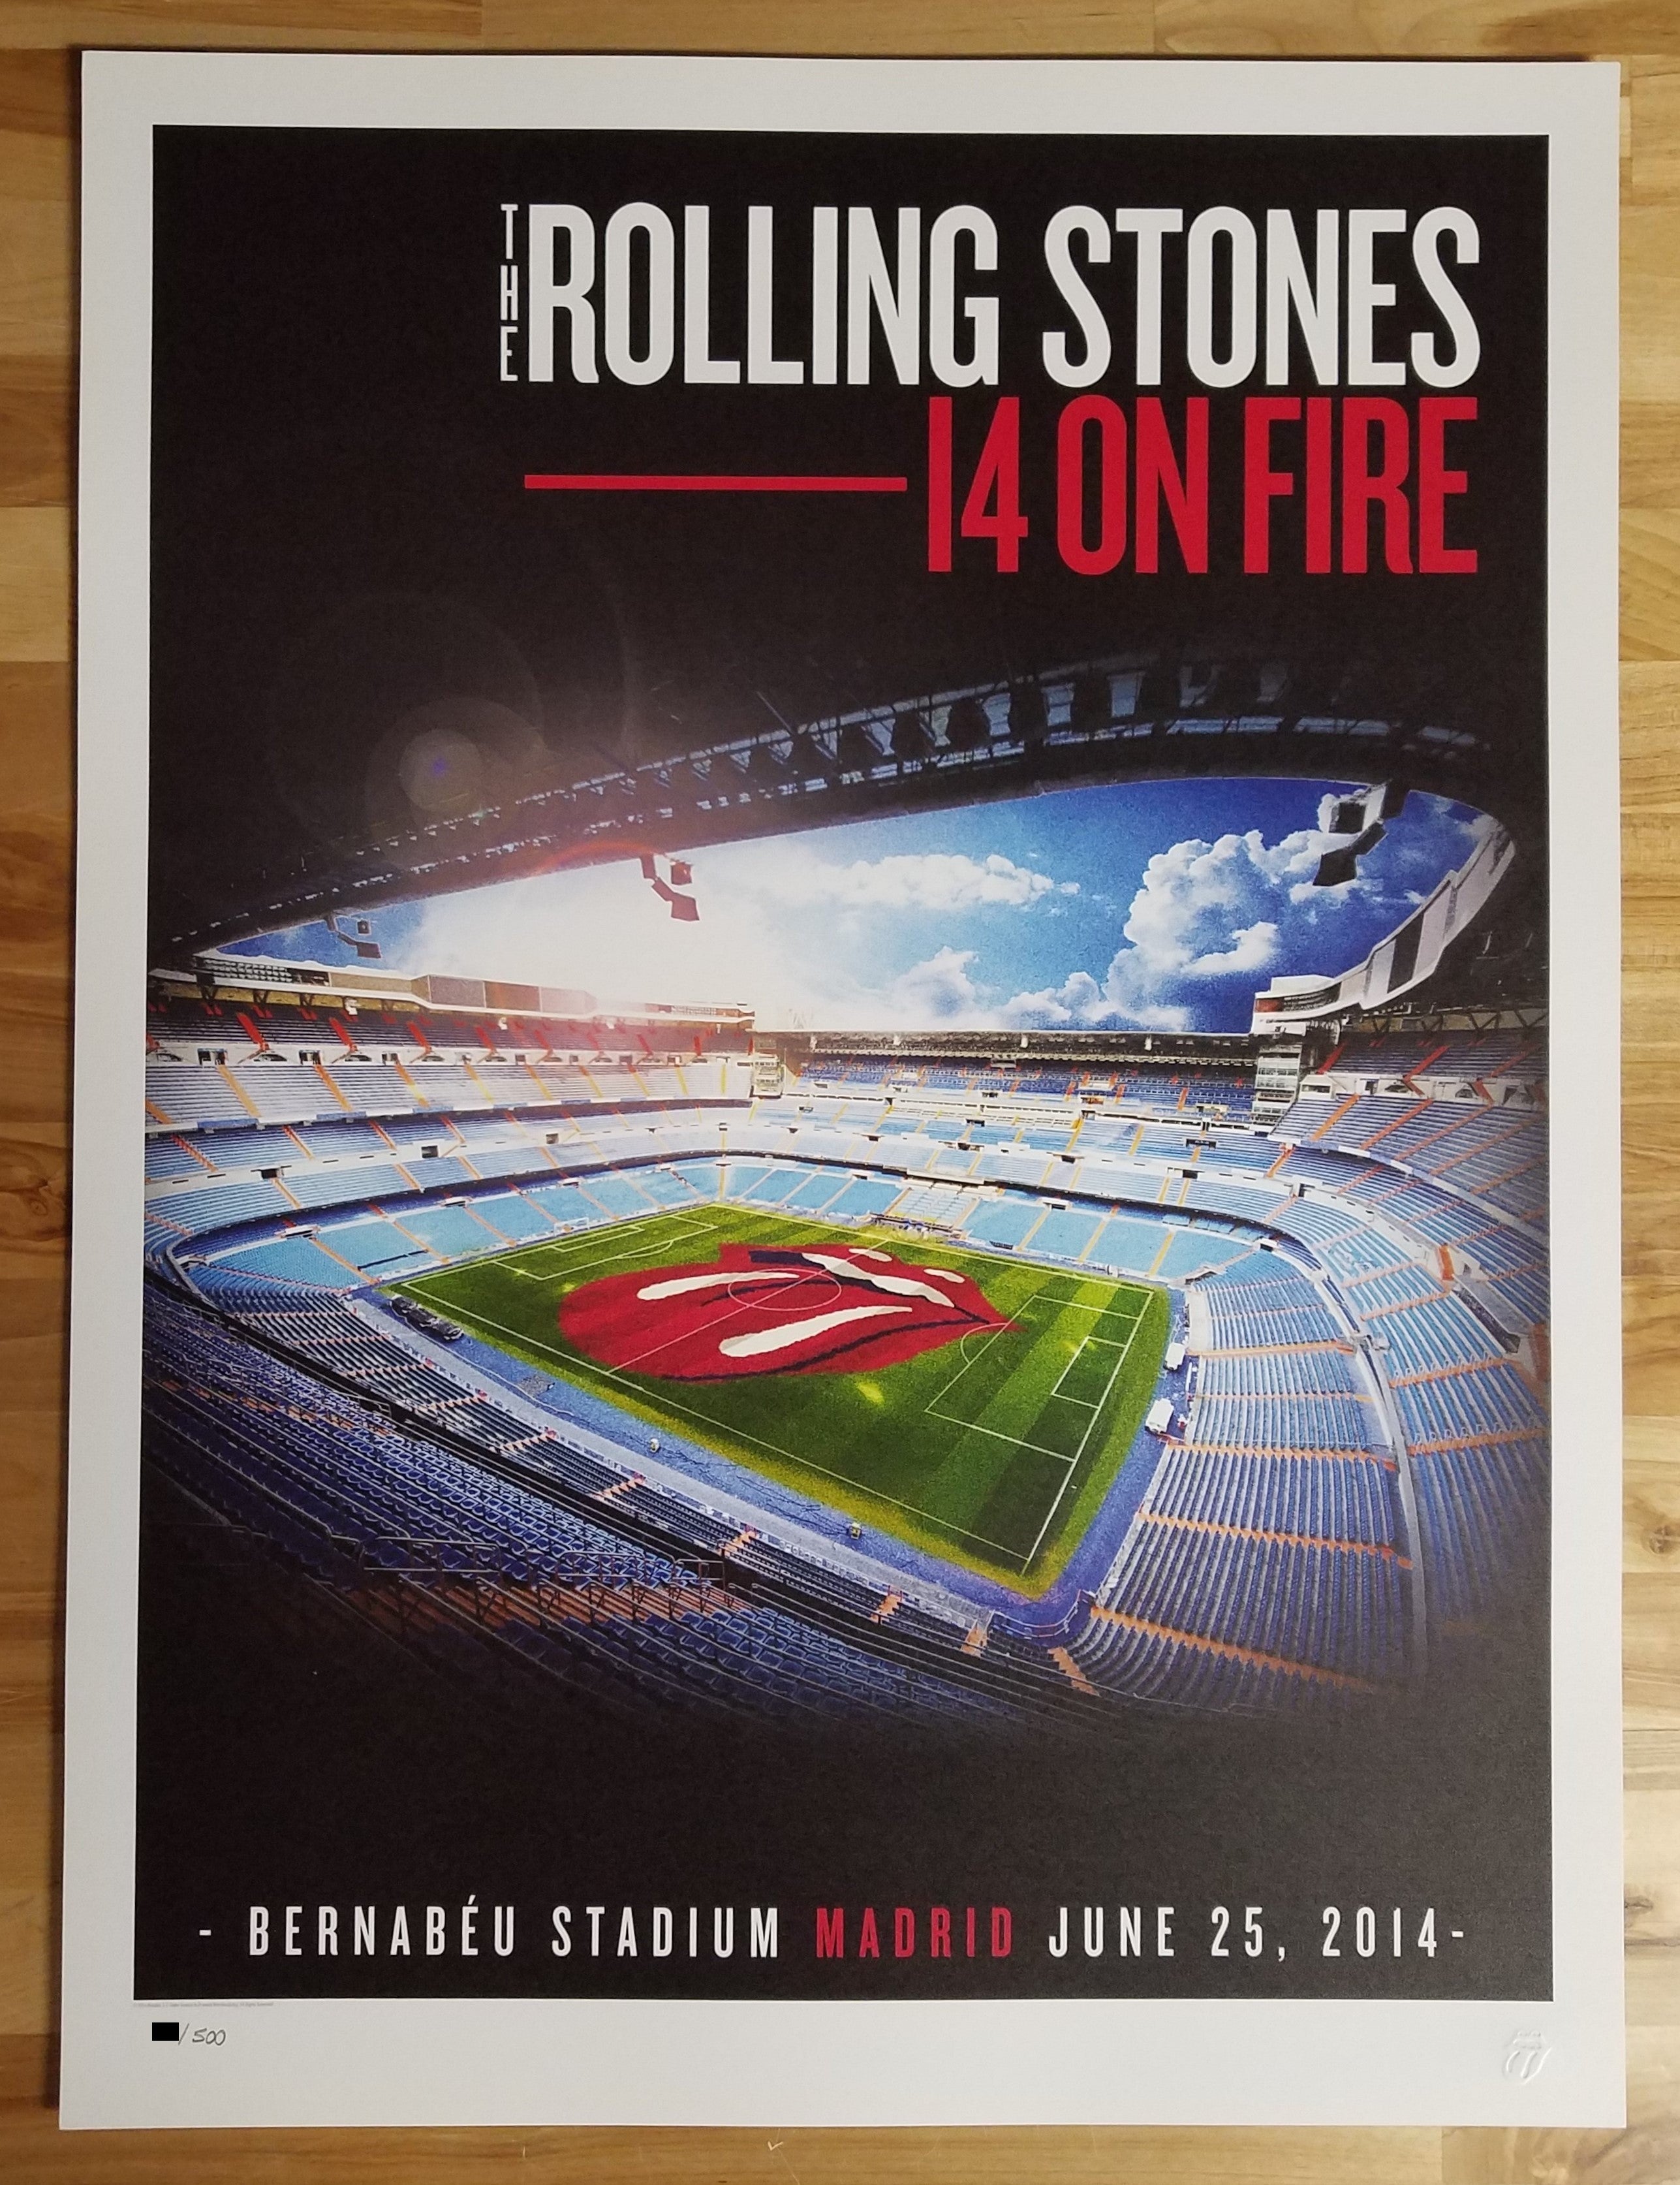 Title: Rolling Stones - 2014 OFFICIAL POSTER MADRID, SPAIN #1  Poster artist:   Edition:  xx/500  Type: Limited edition lithograph   Size: 17" x 23"  Location: Madrid, Spain   Venue: Bernabeu Stadium   Notes: 1st edition, official poster hand numbered and embossed.  Official poster, Europe 14 On Fire Tour original from the show!